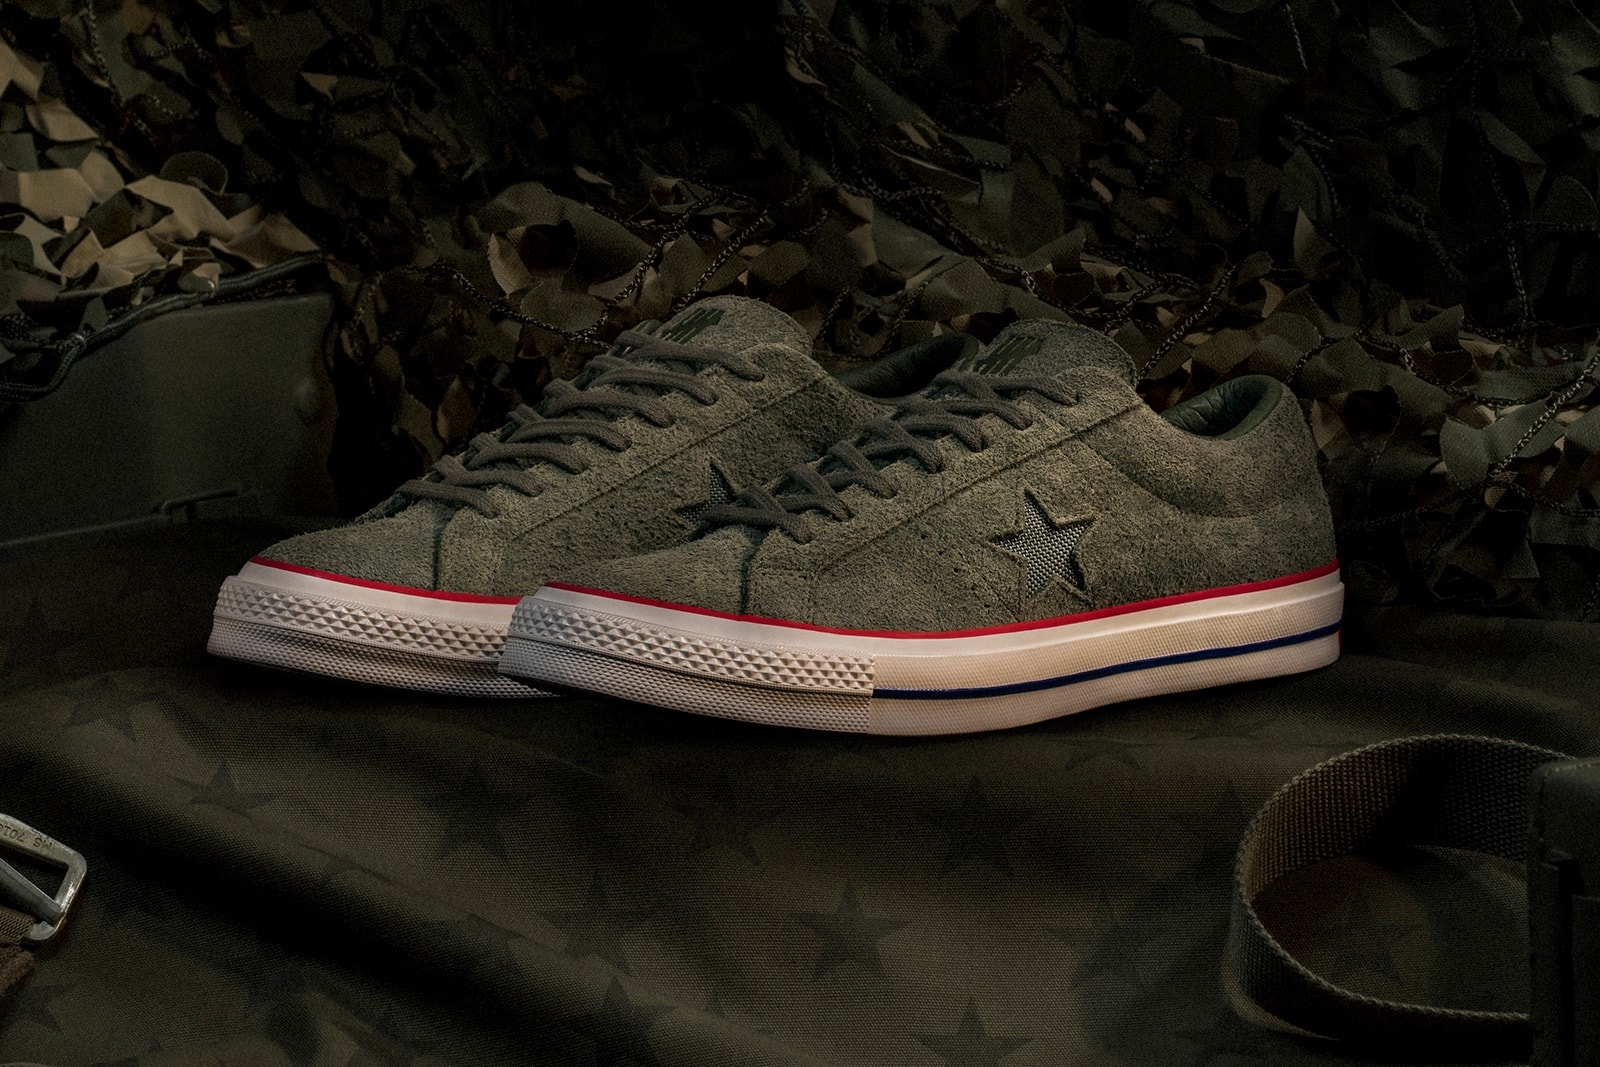 UNDEFEATED x Converse One Star OX Suede スエード